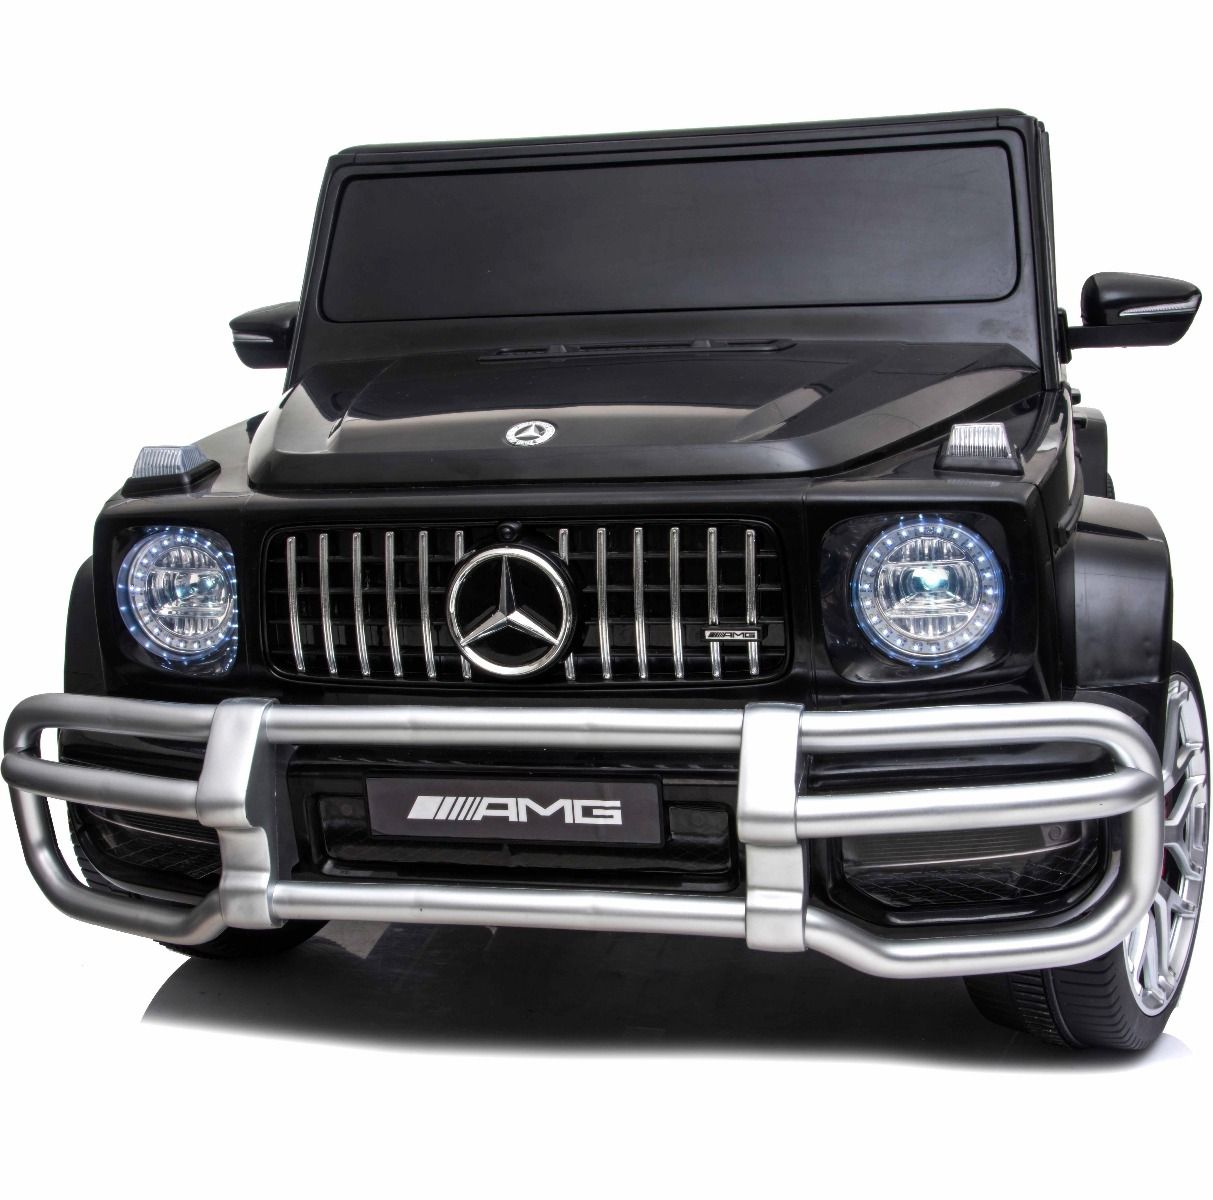 Black Mercedes G-Wagon AMG G63 two seater electric ride on Jeep 24v pickup truck for kids on white background.